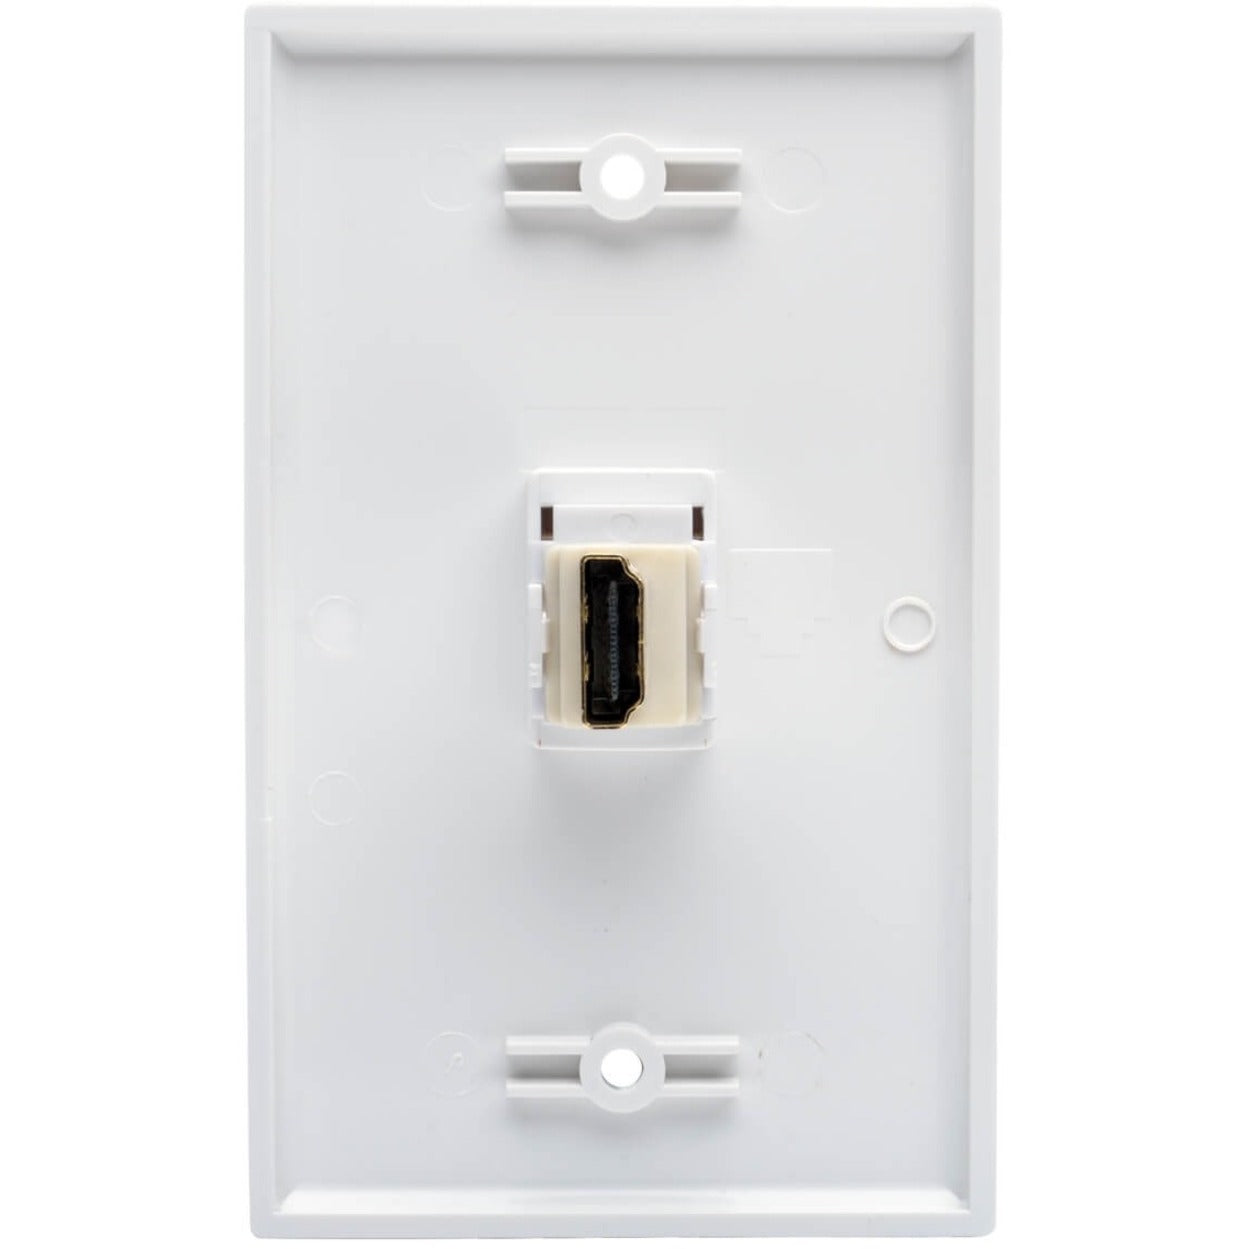 Tripp Lite P164-000-KJ-WH HDMI Keystone Snap-in Wallplate Coupler, HDMI F/F, Gold-Plated Connectors, White